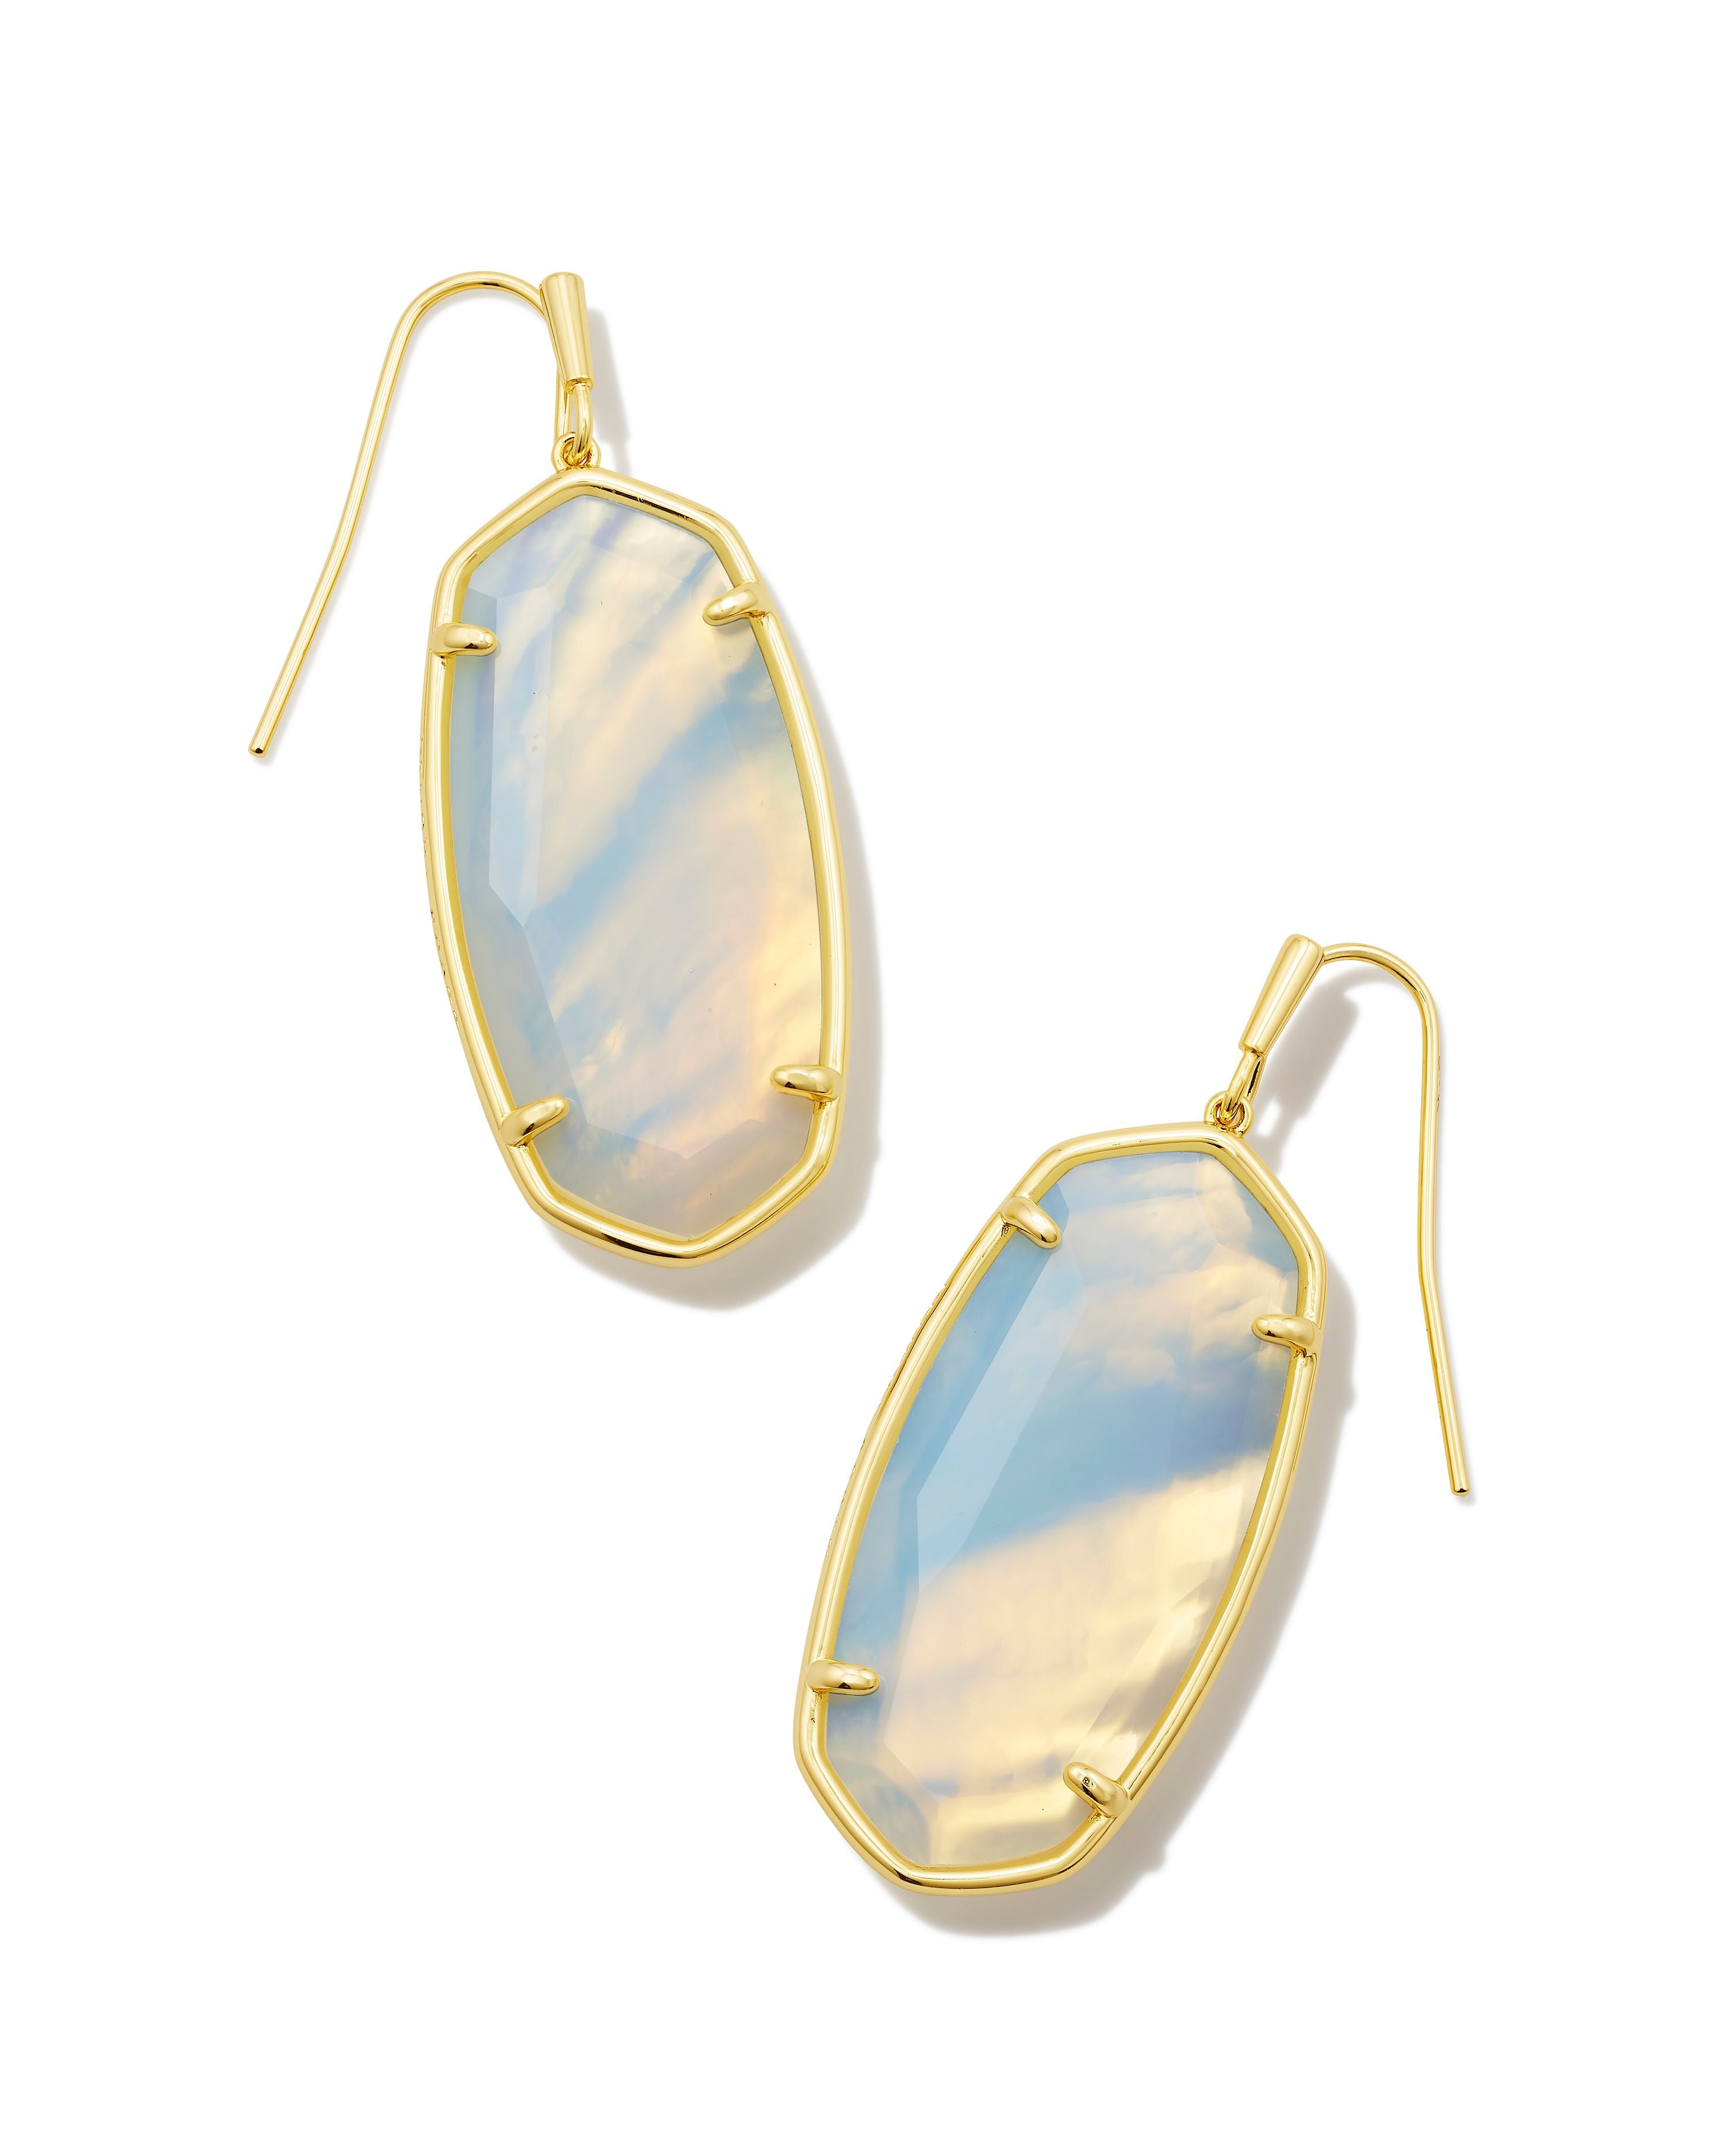 Faceted Elle Drop Earring in Gold Iridescent Opalite Illusion